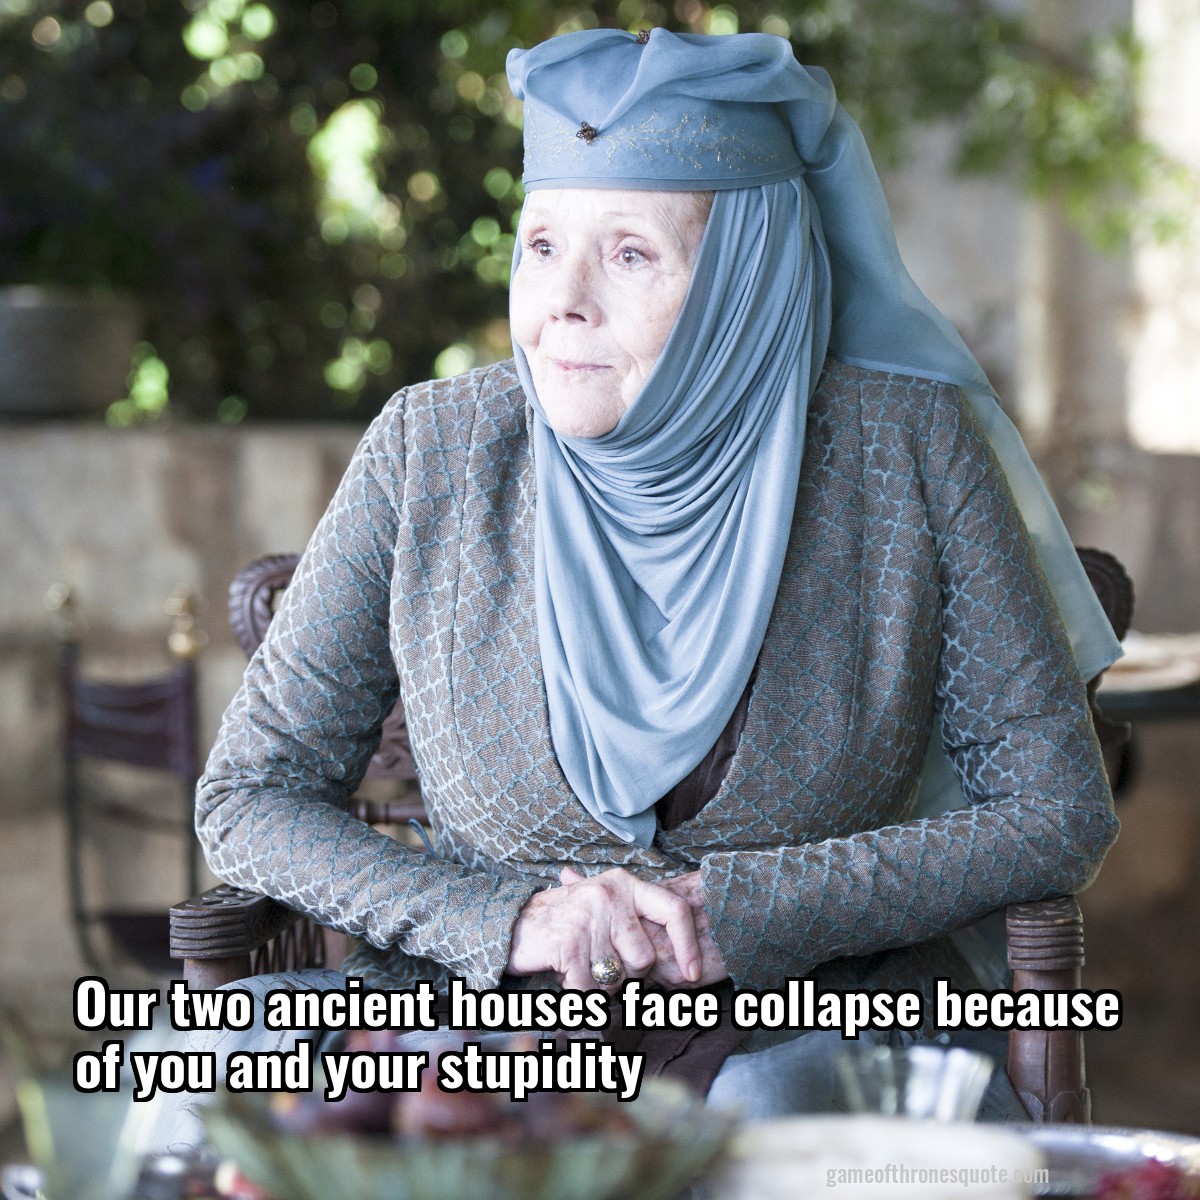 Our two ancient houses face collapse because of you and your stupidity